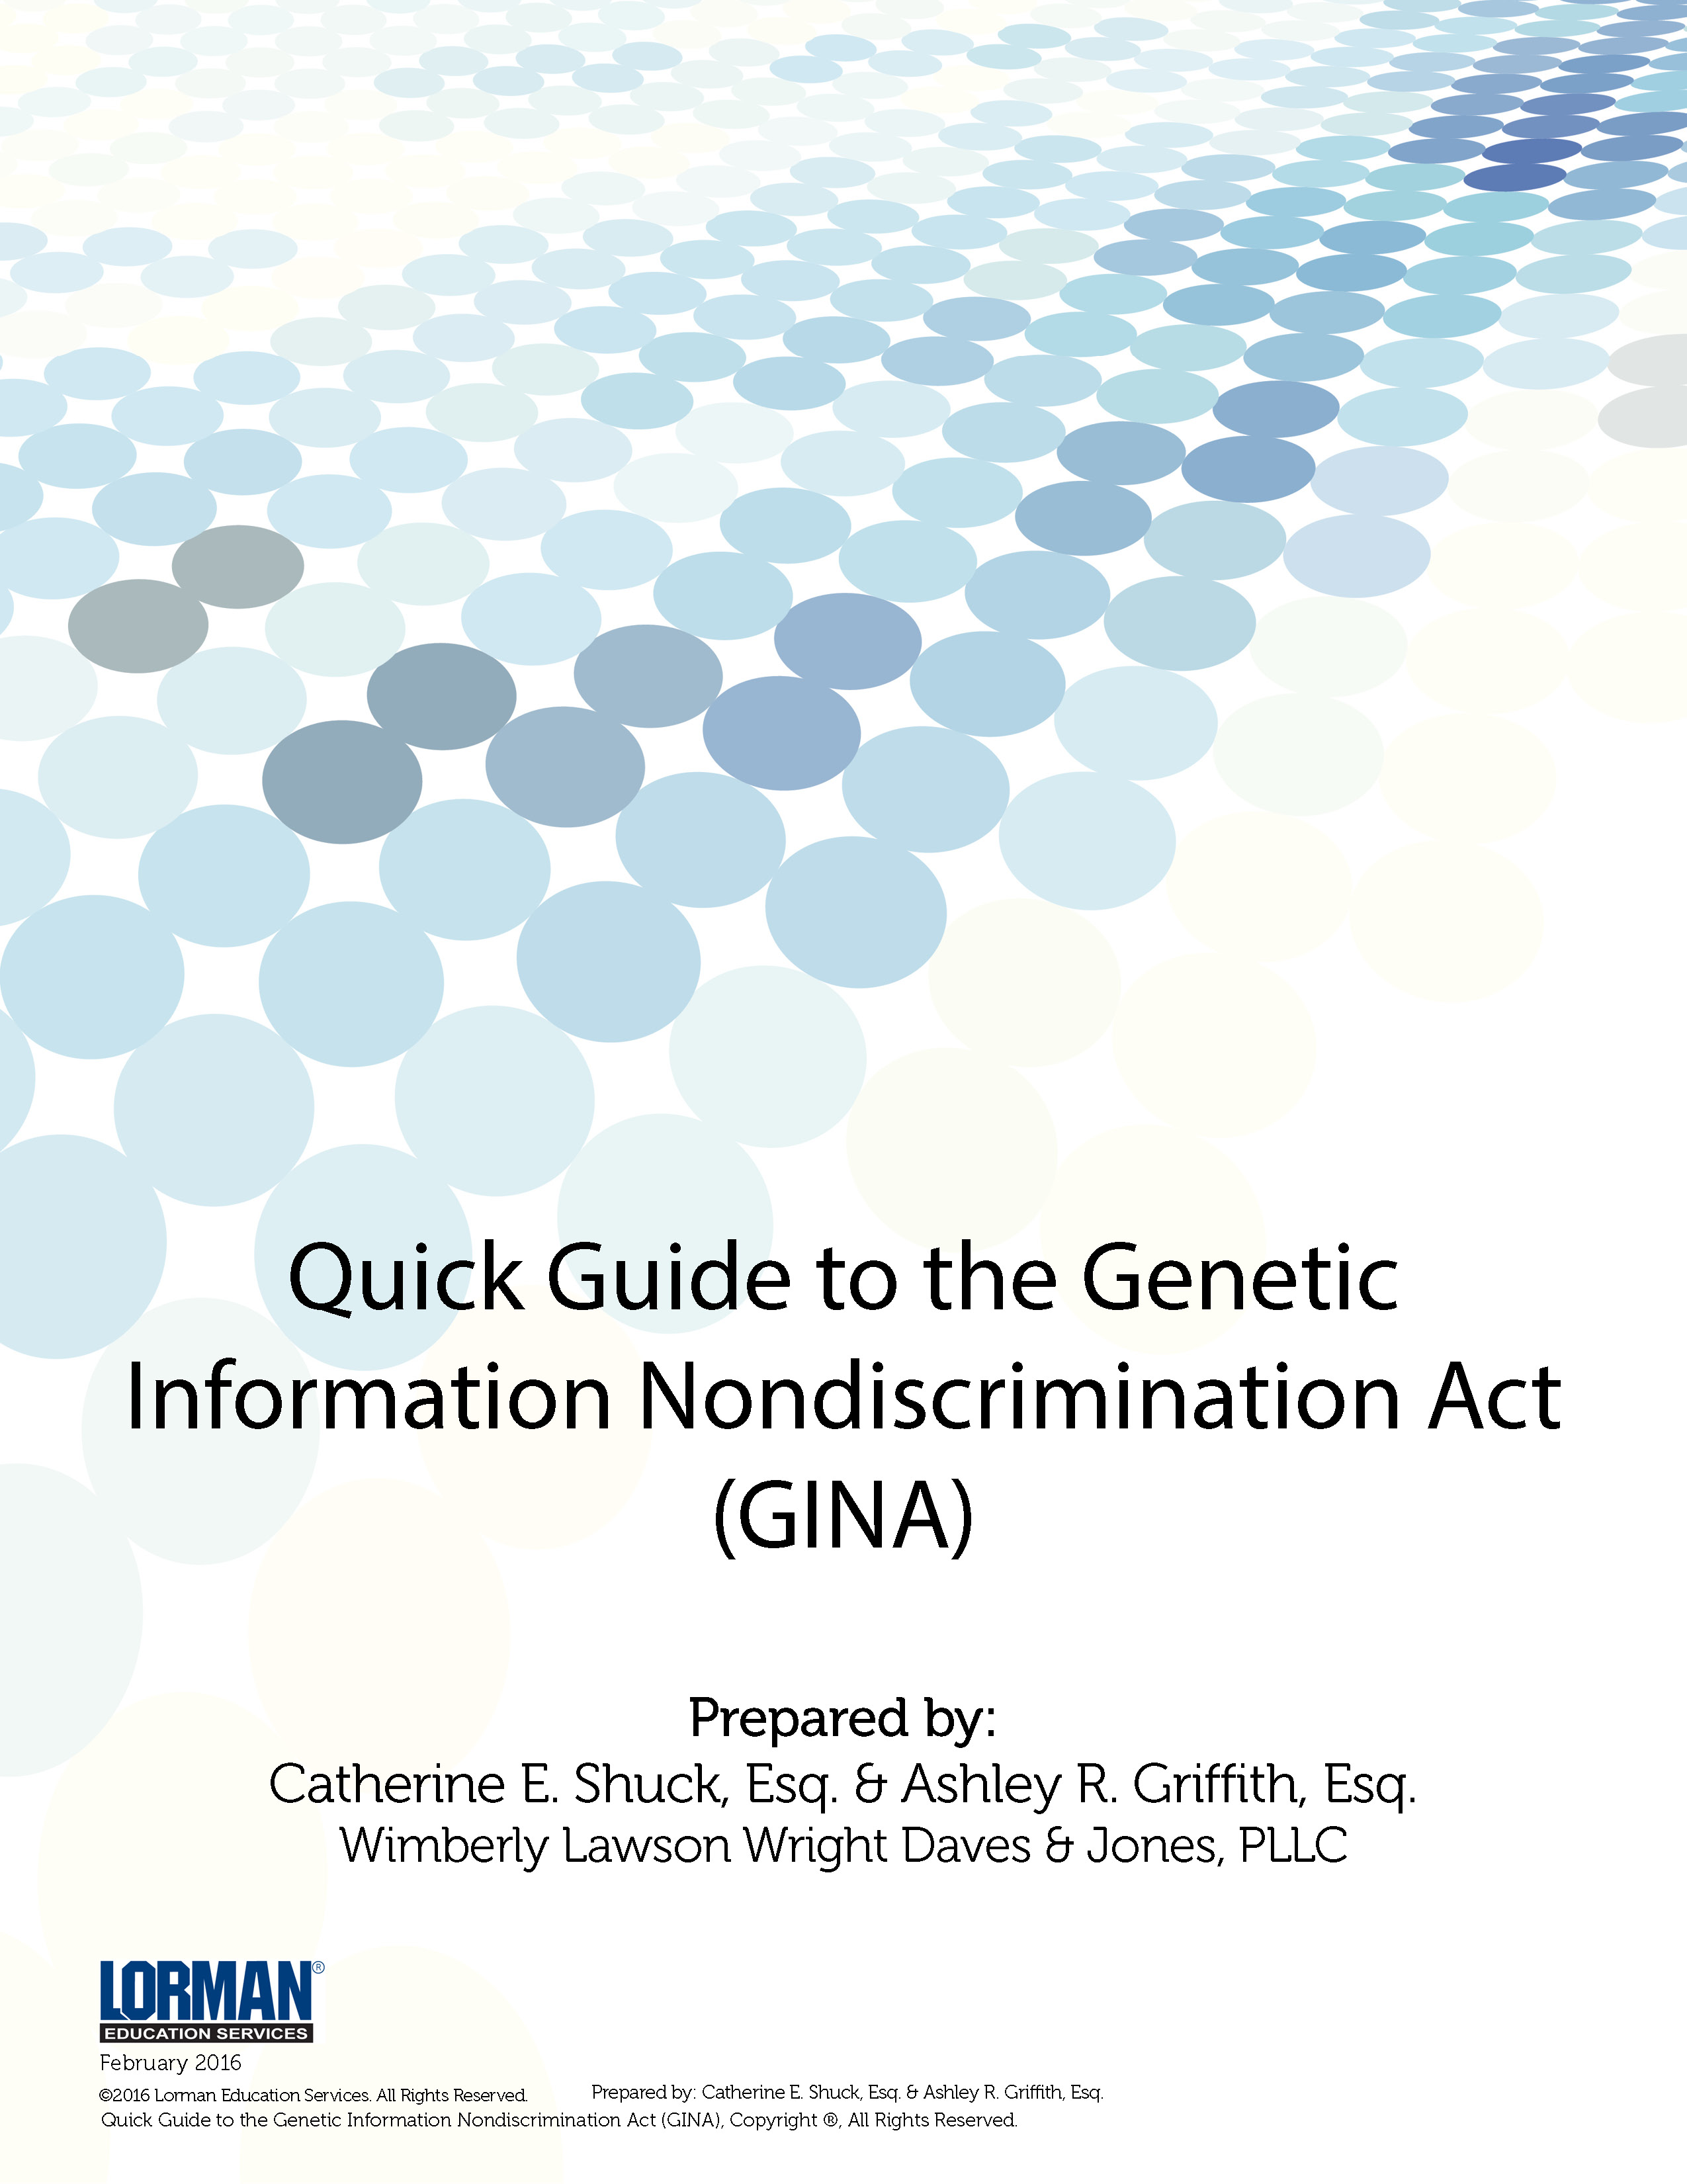 Quick Guide to the Genetic Information Nondiscrimination Act (GINA)